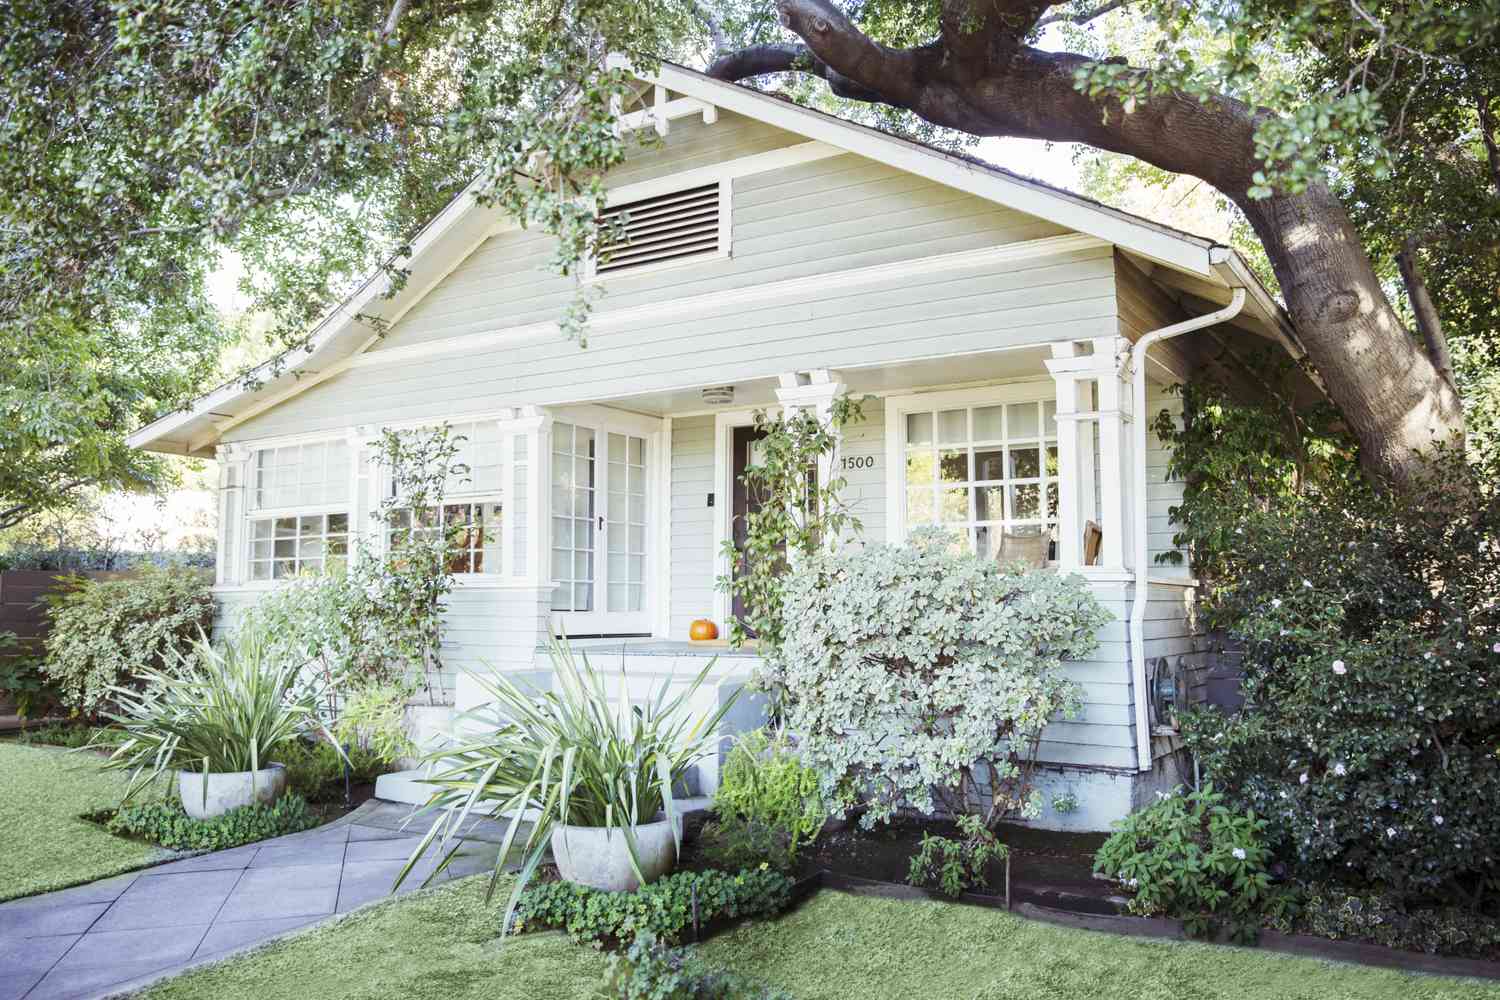 20 Exterior Entryway Designs With Charming Curb Appeal